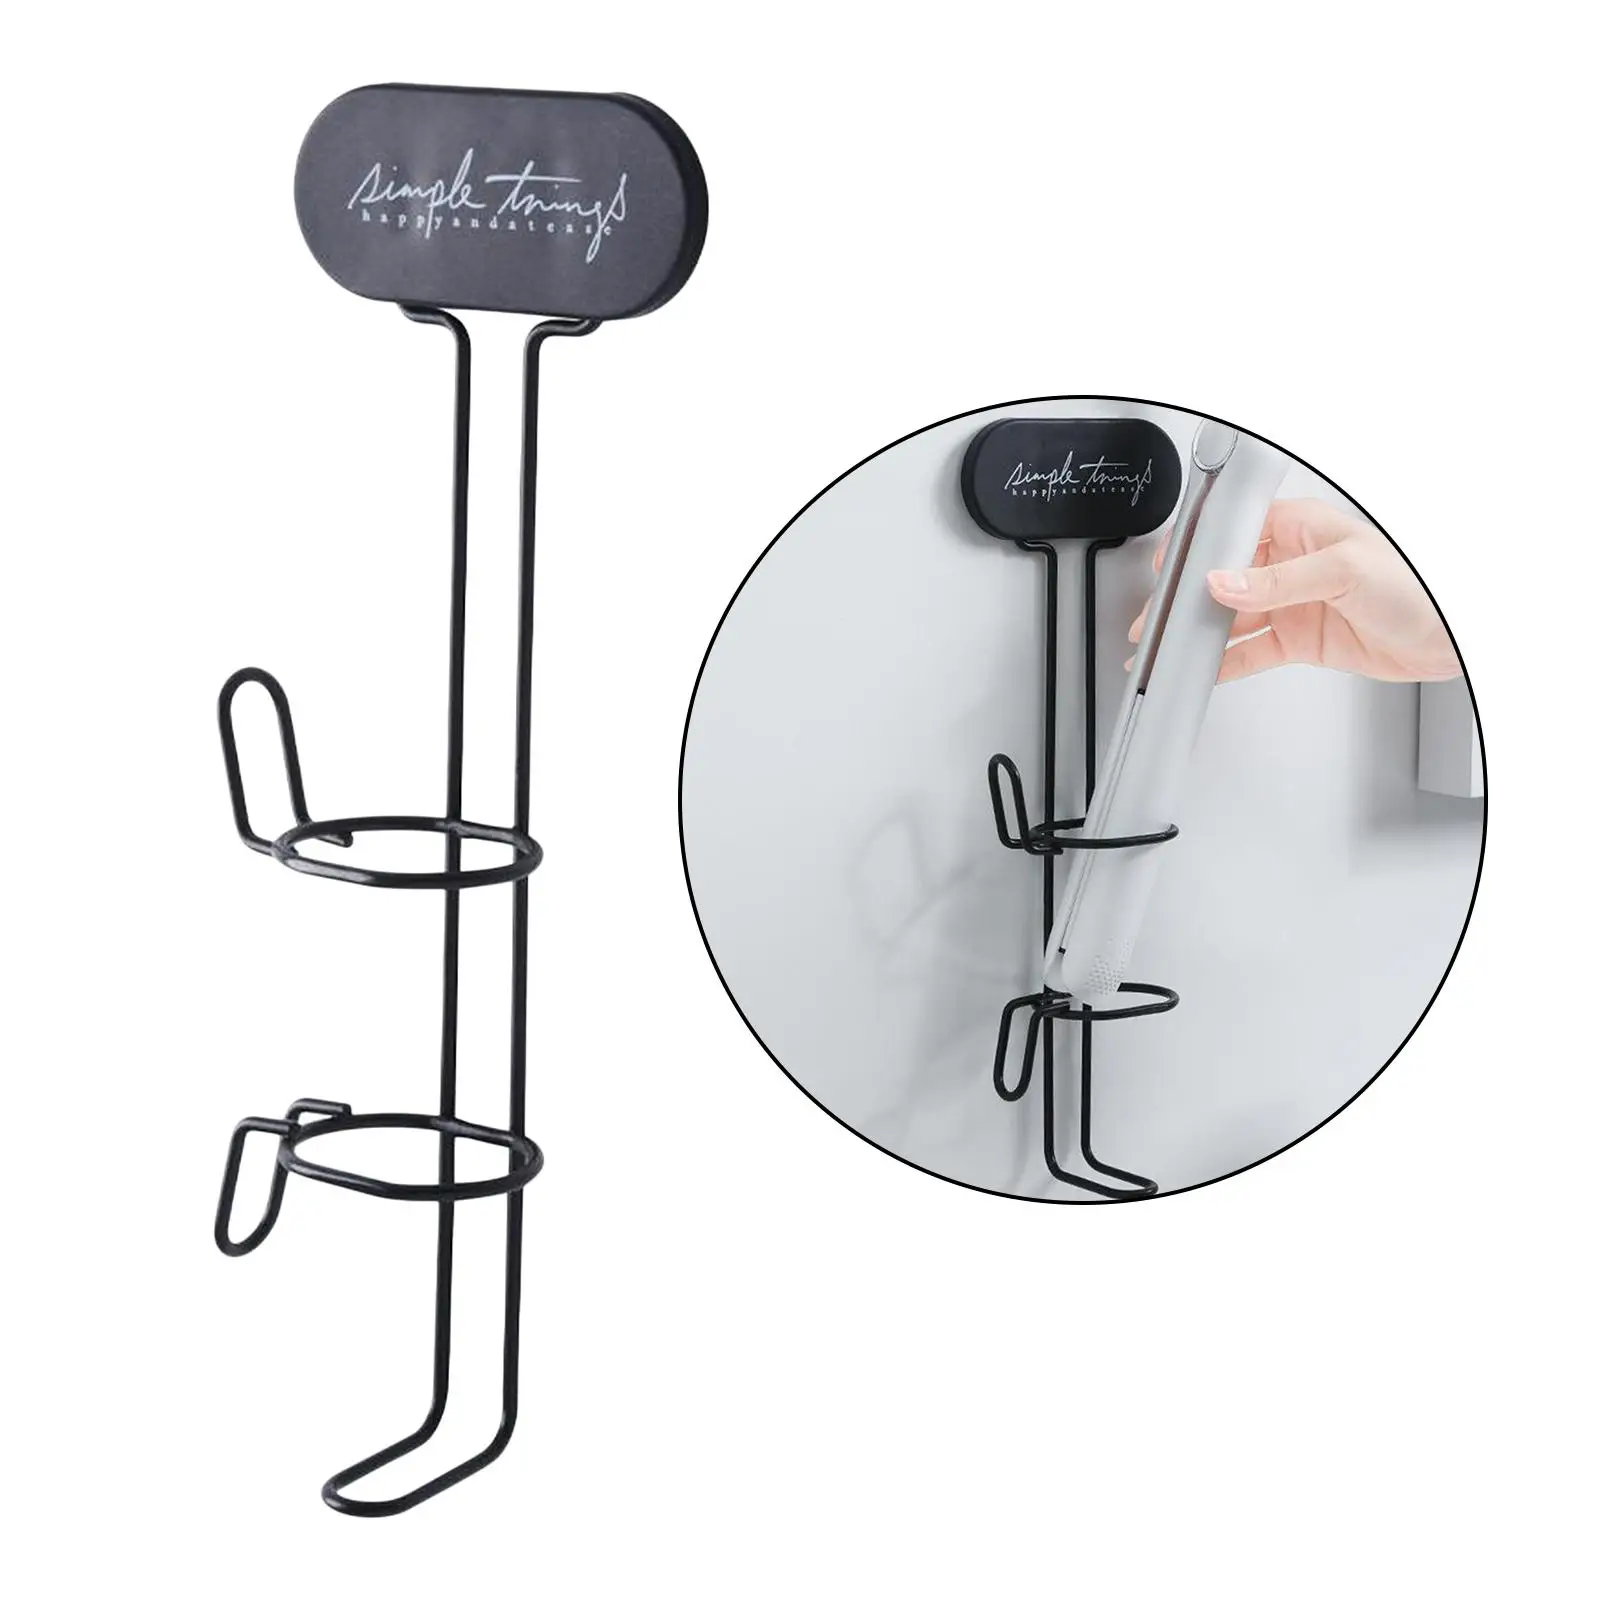 Hair Dryer Rack  Mounted, Punch-, Easy and Convenient to Install, Save Space and Keep Your Hair Dryer in Right Place